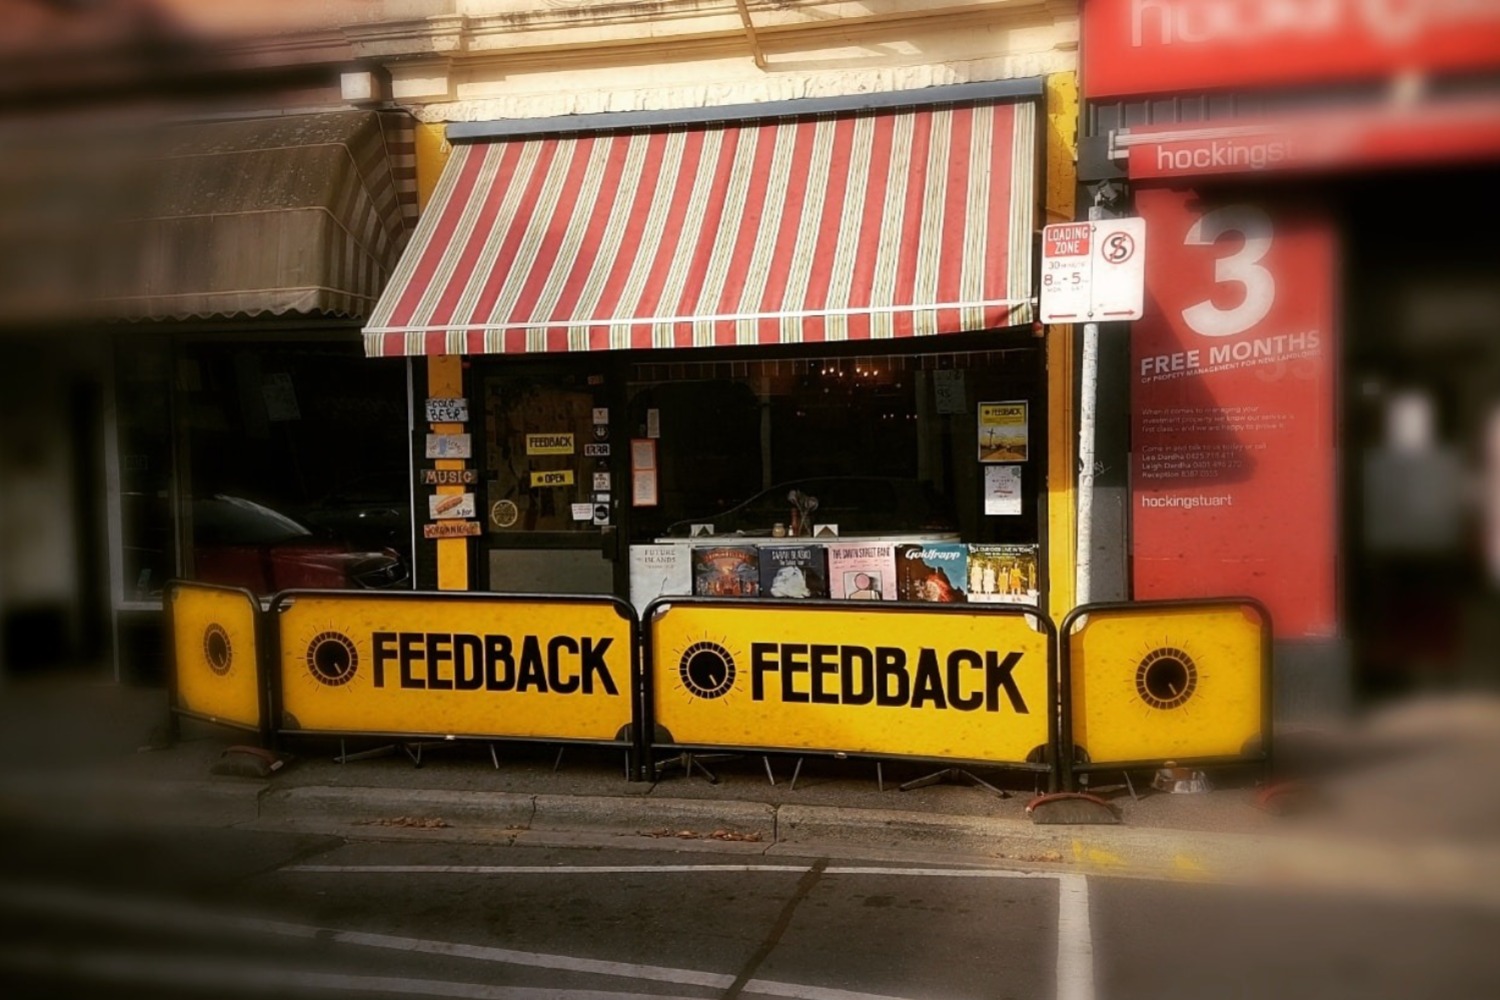 Melbourne record store cafes - Feedback Cafe